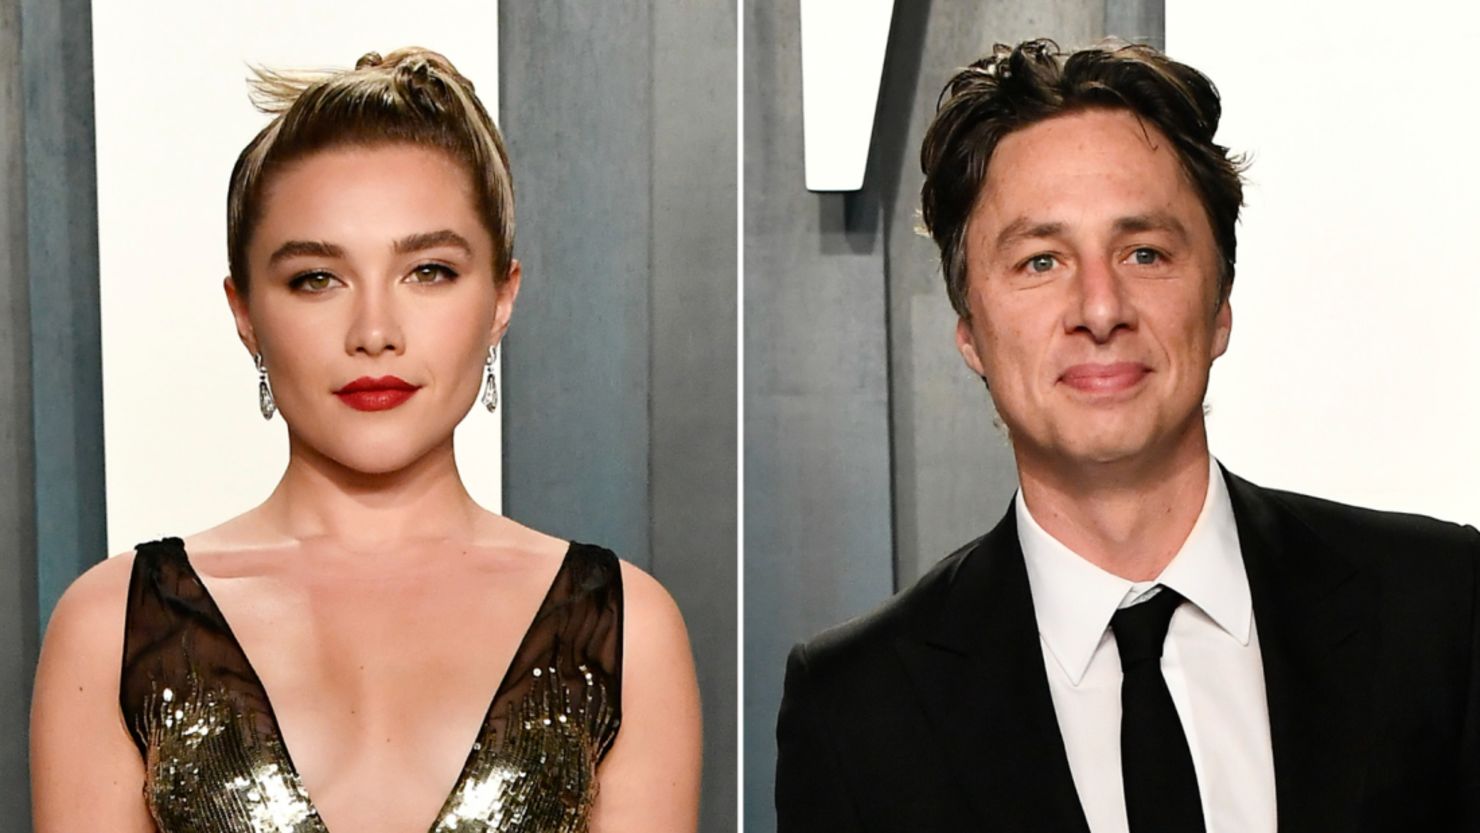 Florence Pugh has opened about about criticism she and her boyfriend Zach Braff have faced.